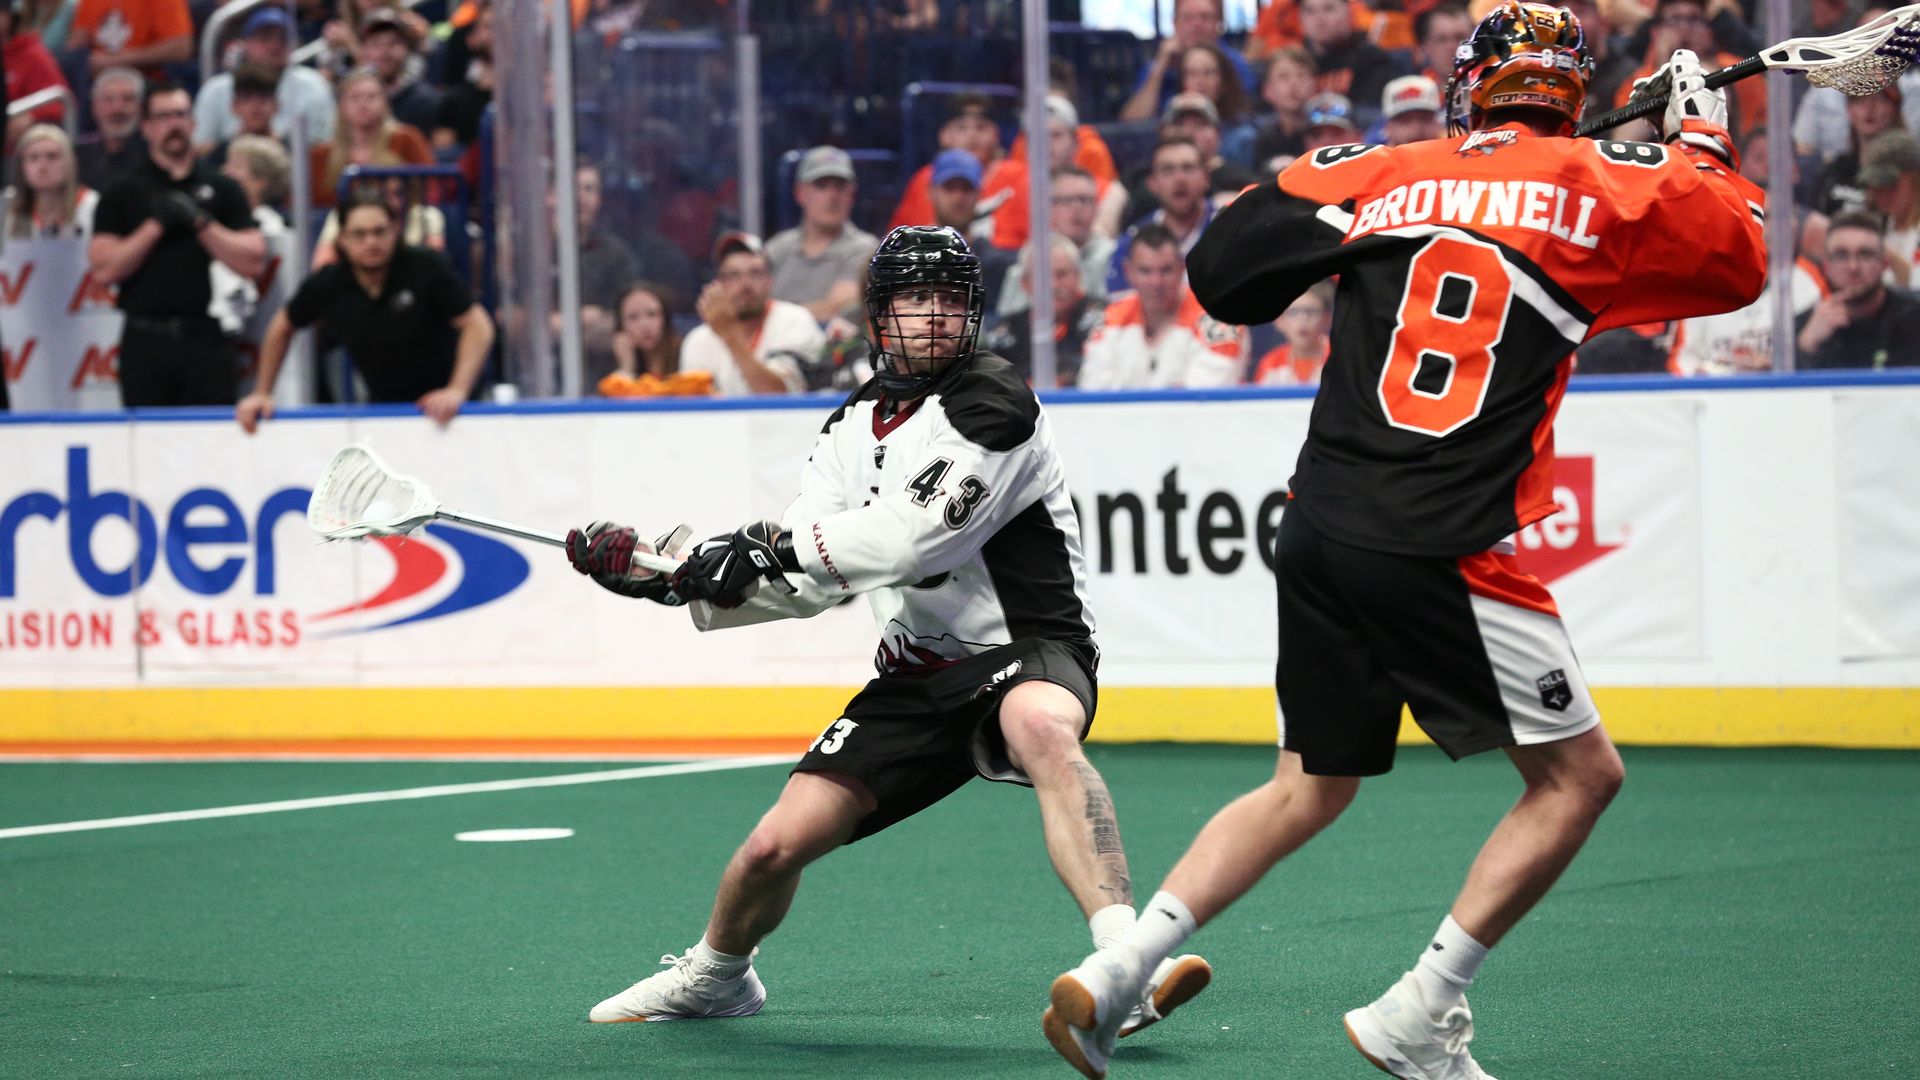 The Colorado Mammoth's Tyson Gibson shoots in Game 1 of the NLL Finals against the Buffalo Bandits. Photo courtesy of NLL